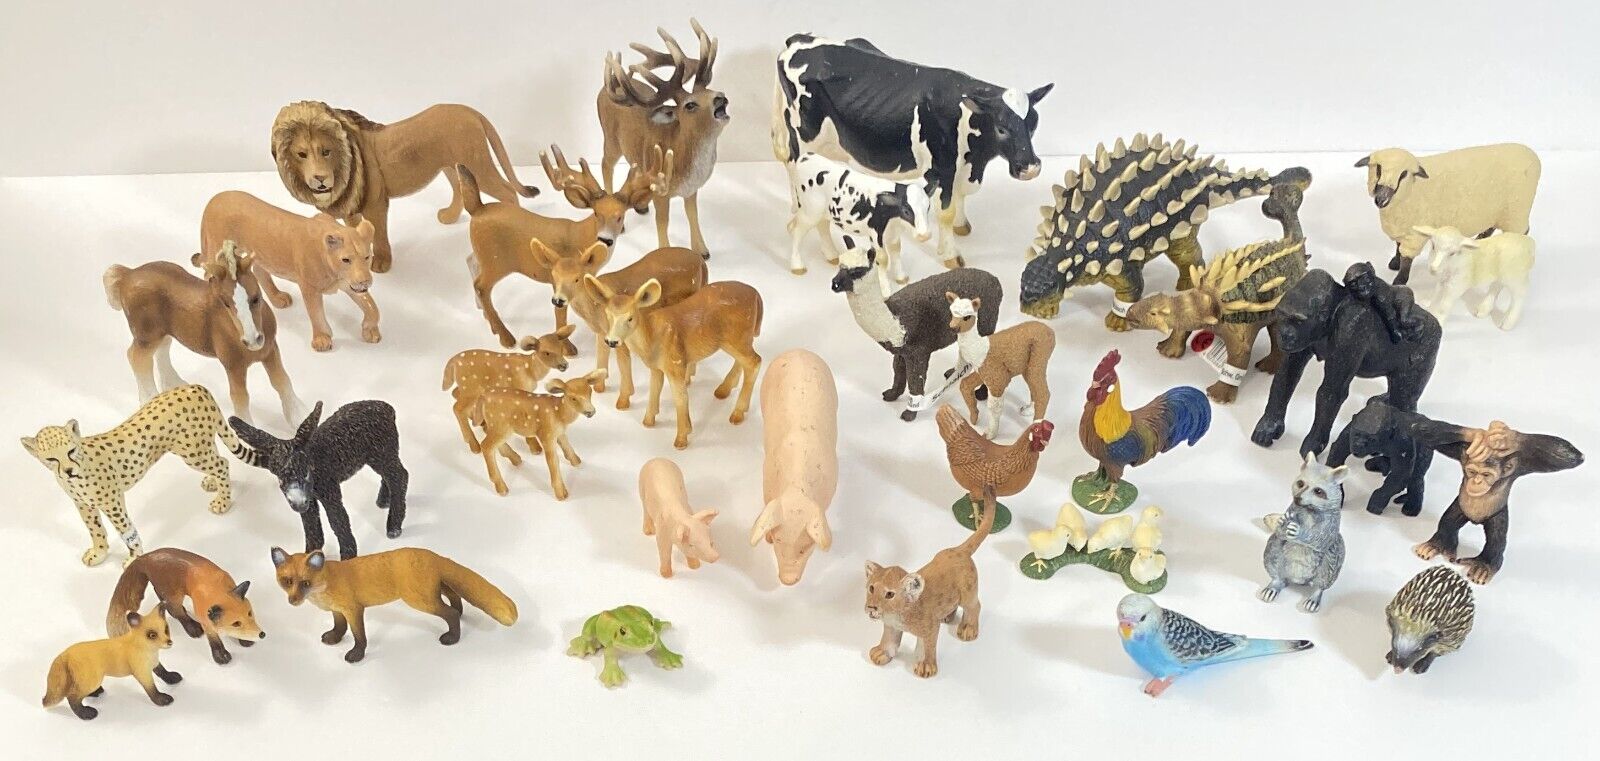 Schleich Safari Ltd. Huge Lot Of 35 Animals Wild Zoo Farm New and Gently Used